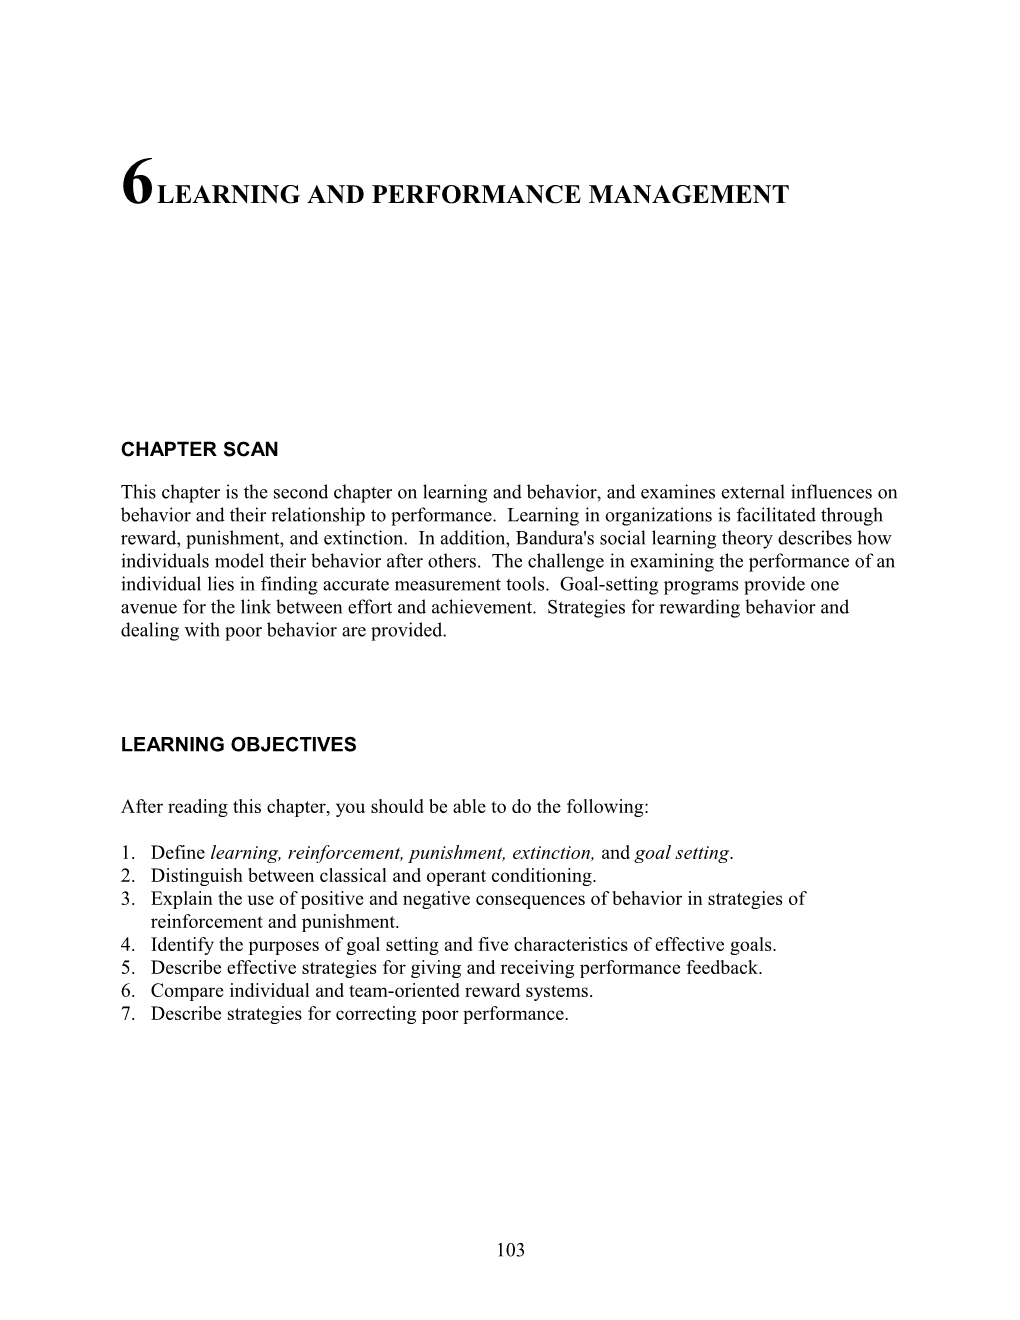 6Learning and Performance Management